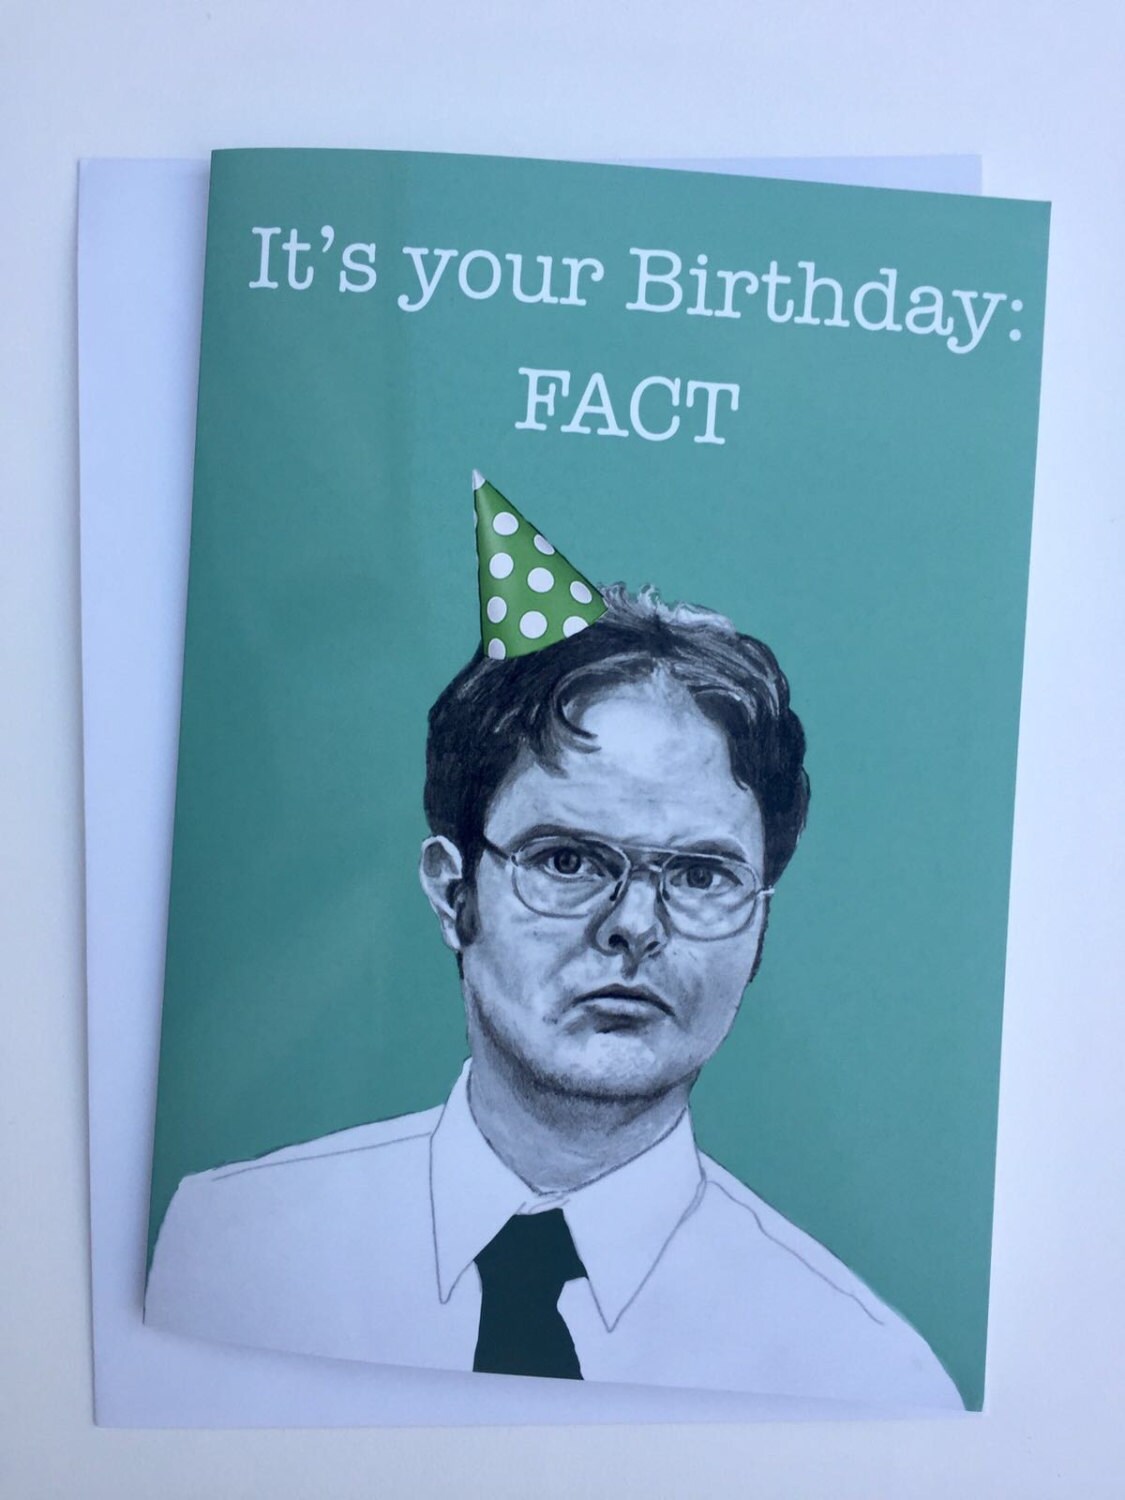 Dwight Schrute Us Office Illustrative A5 Birthday Card 